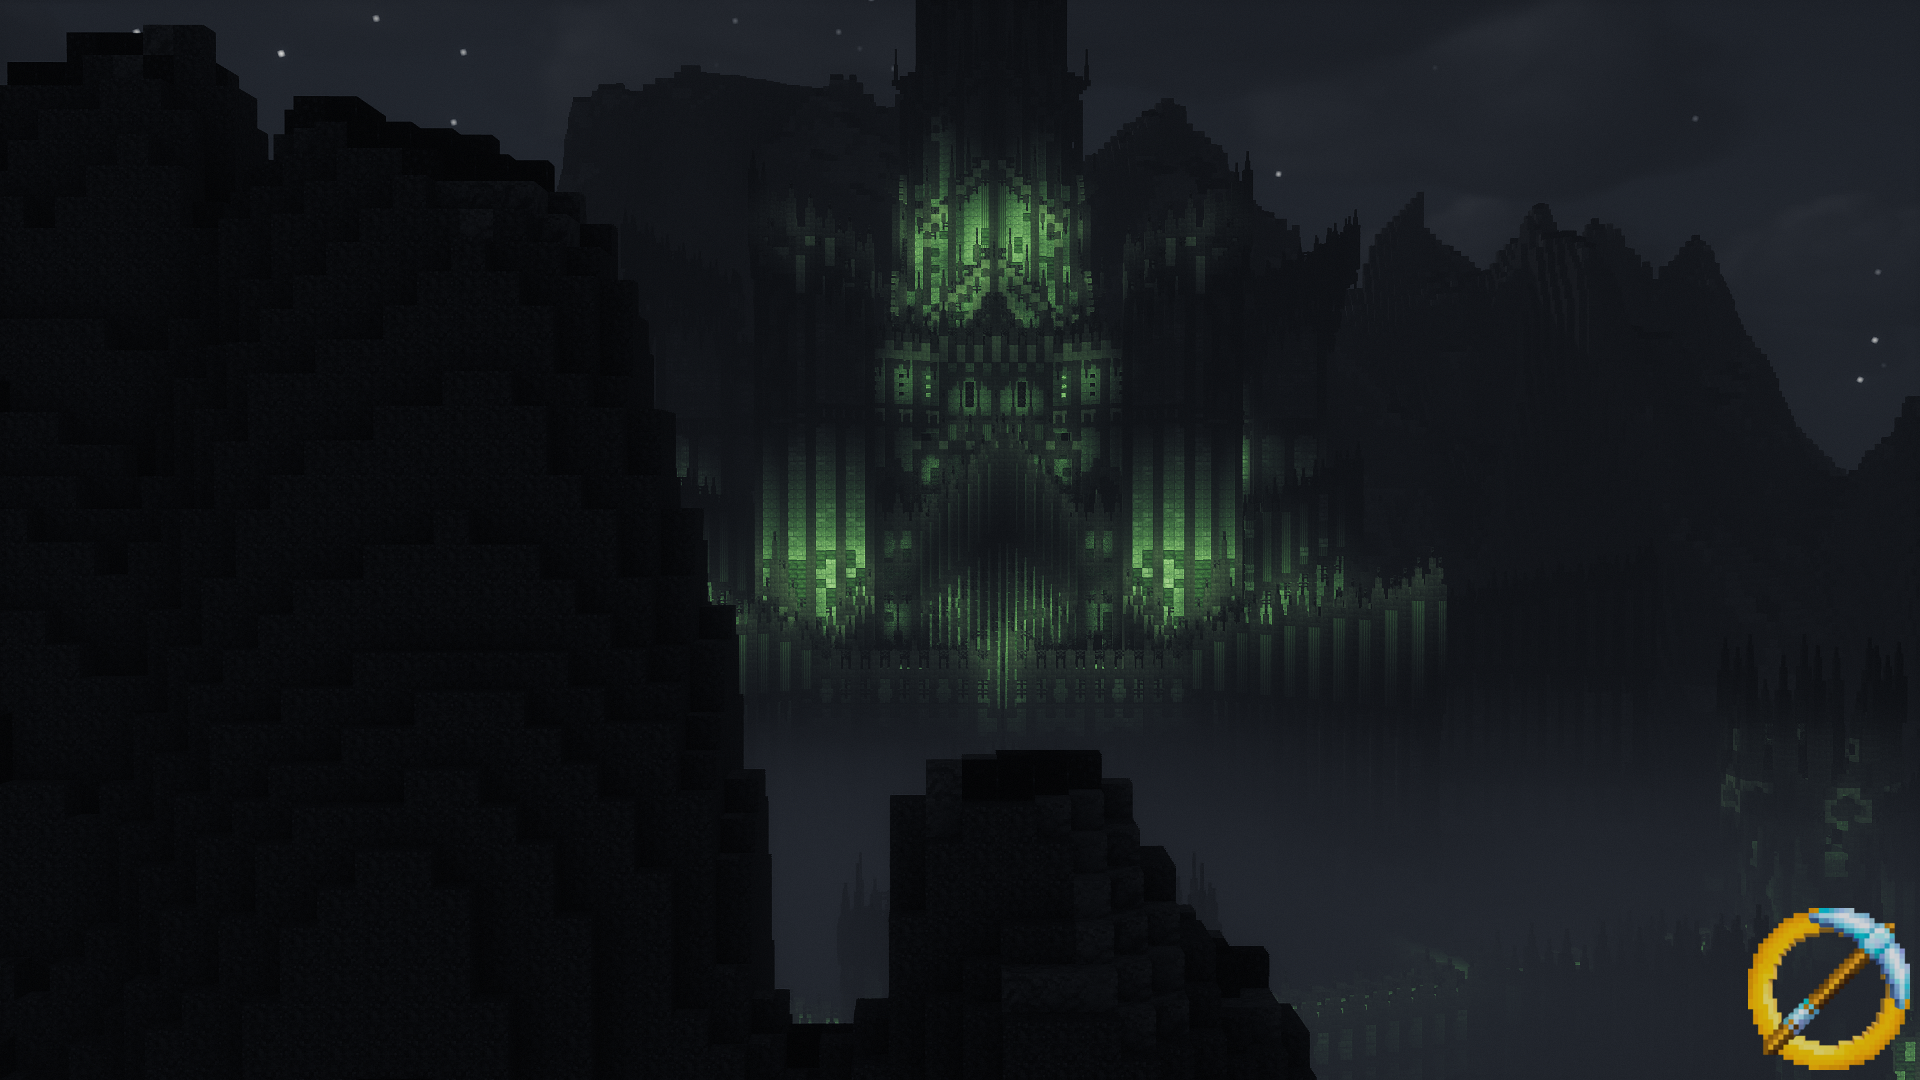 Looking Minas Morgul straight in the eyes